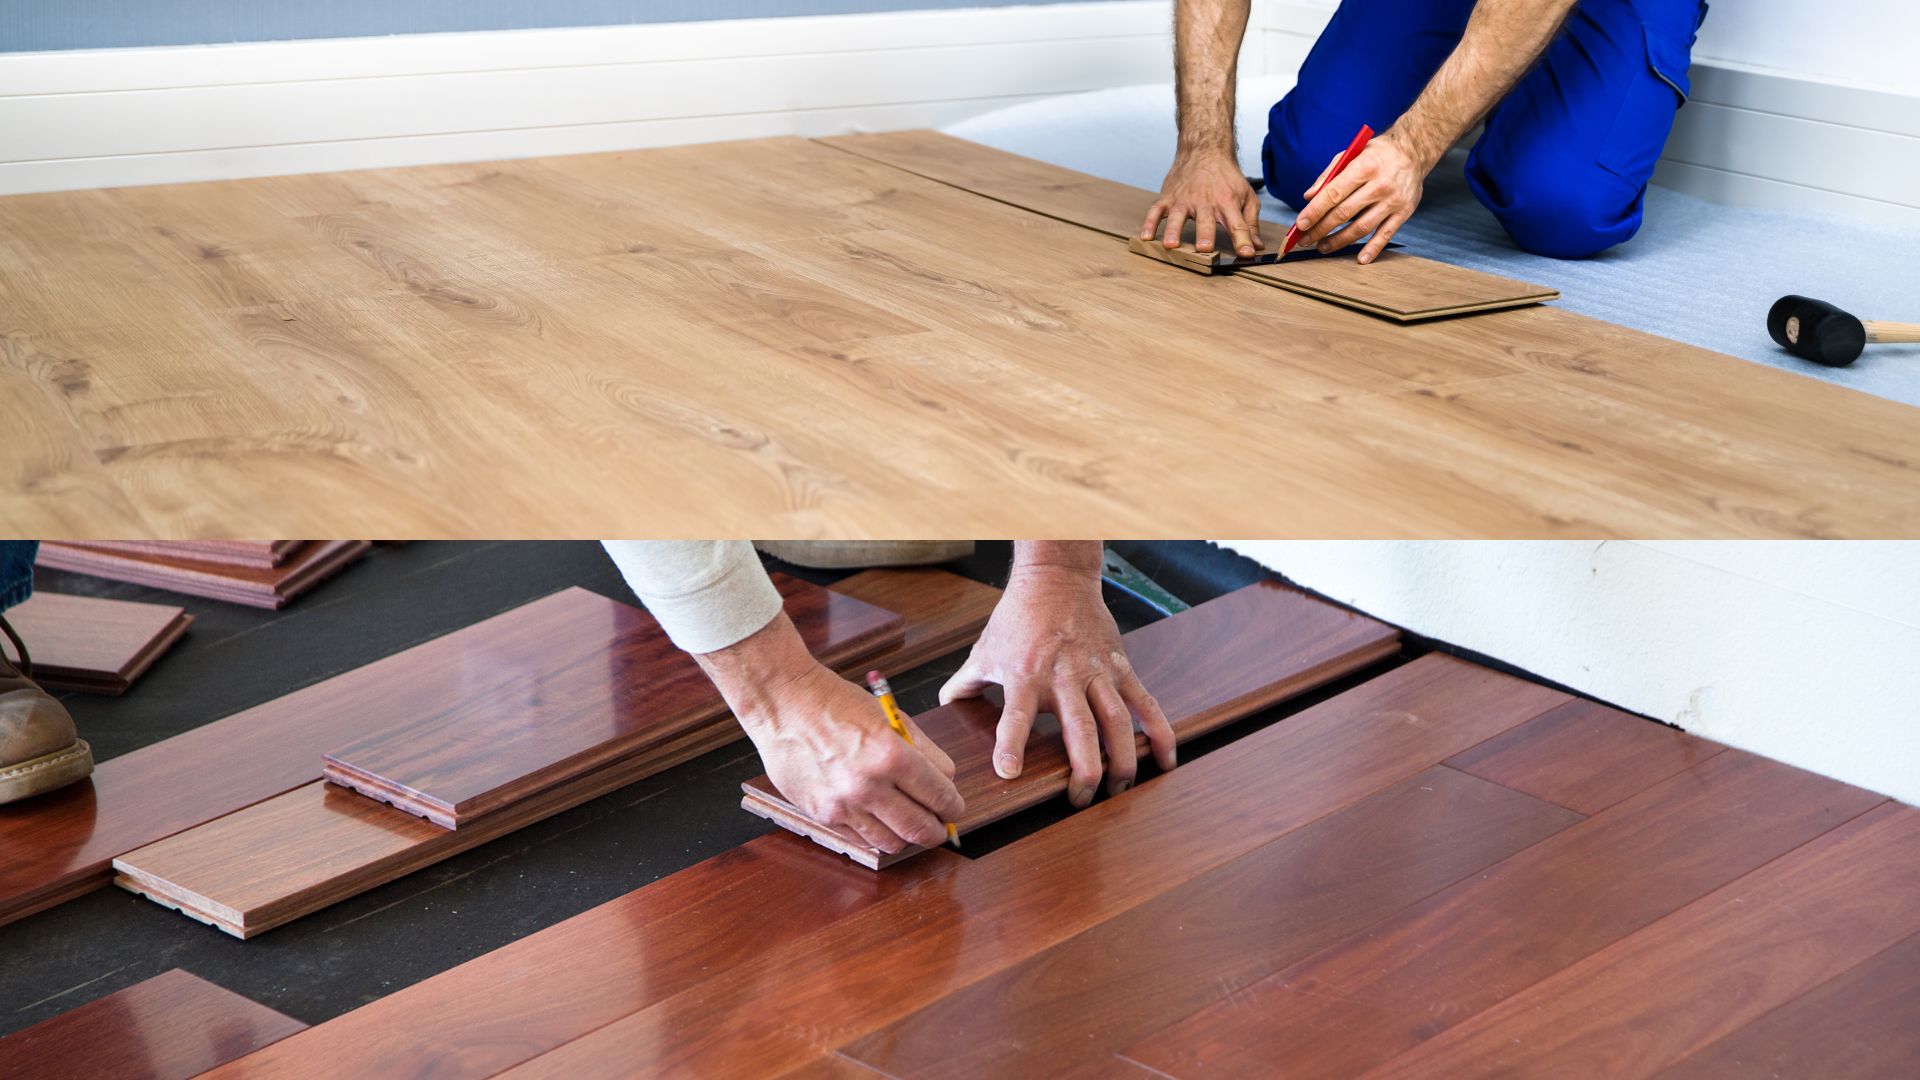 What are the advantages of laminate flooring over those of solid hardwood flooring